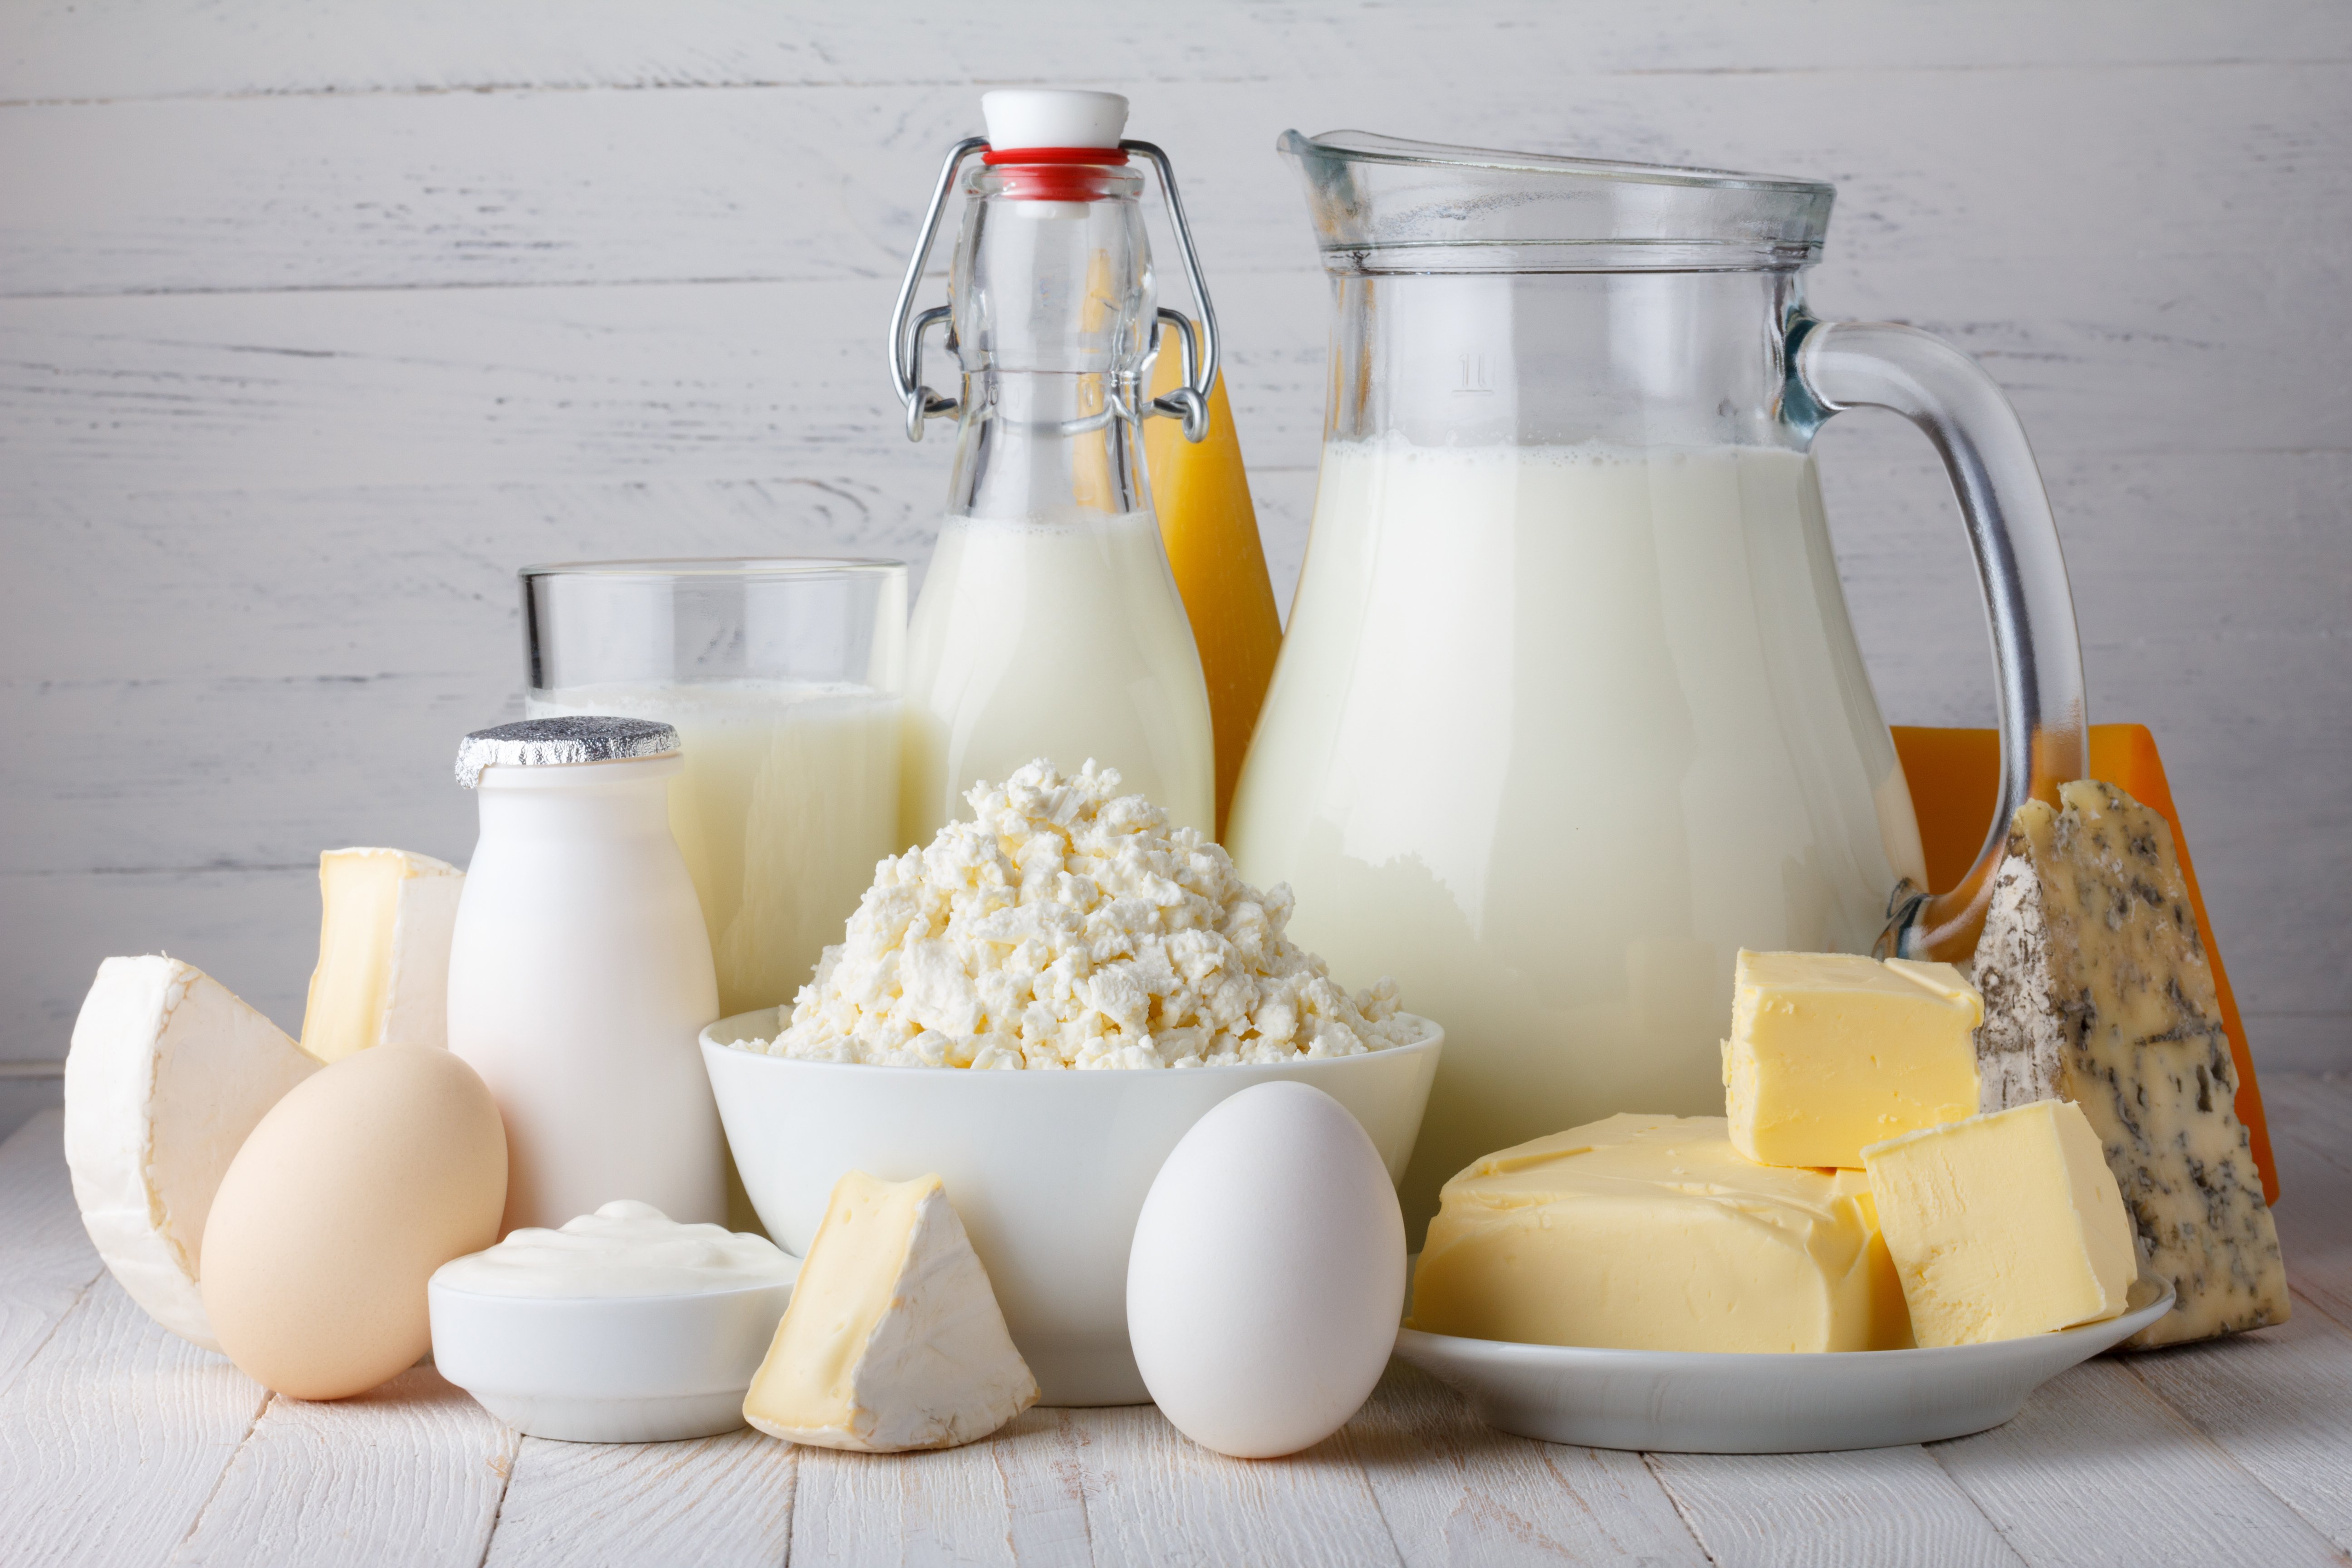 Dairy products: